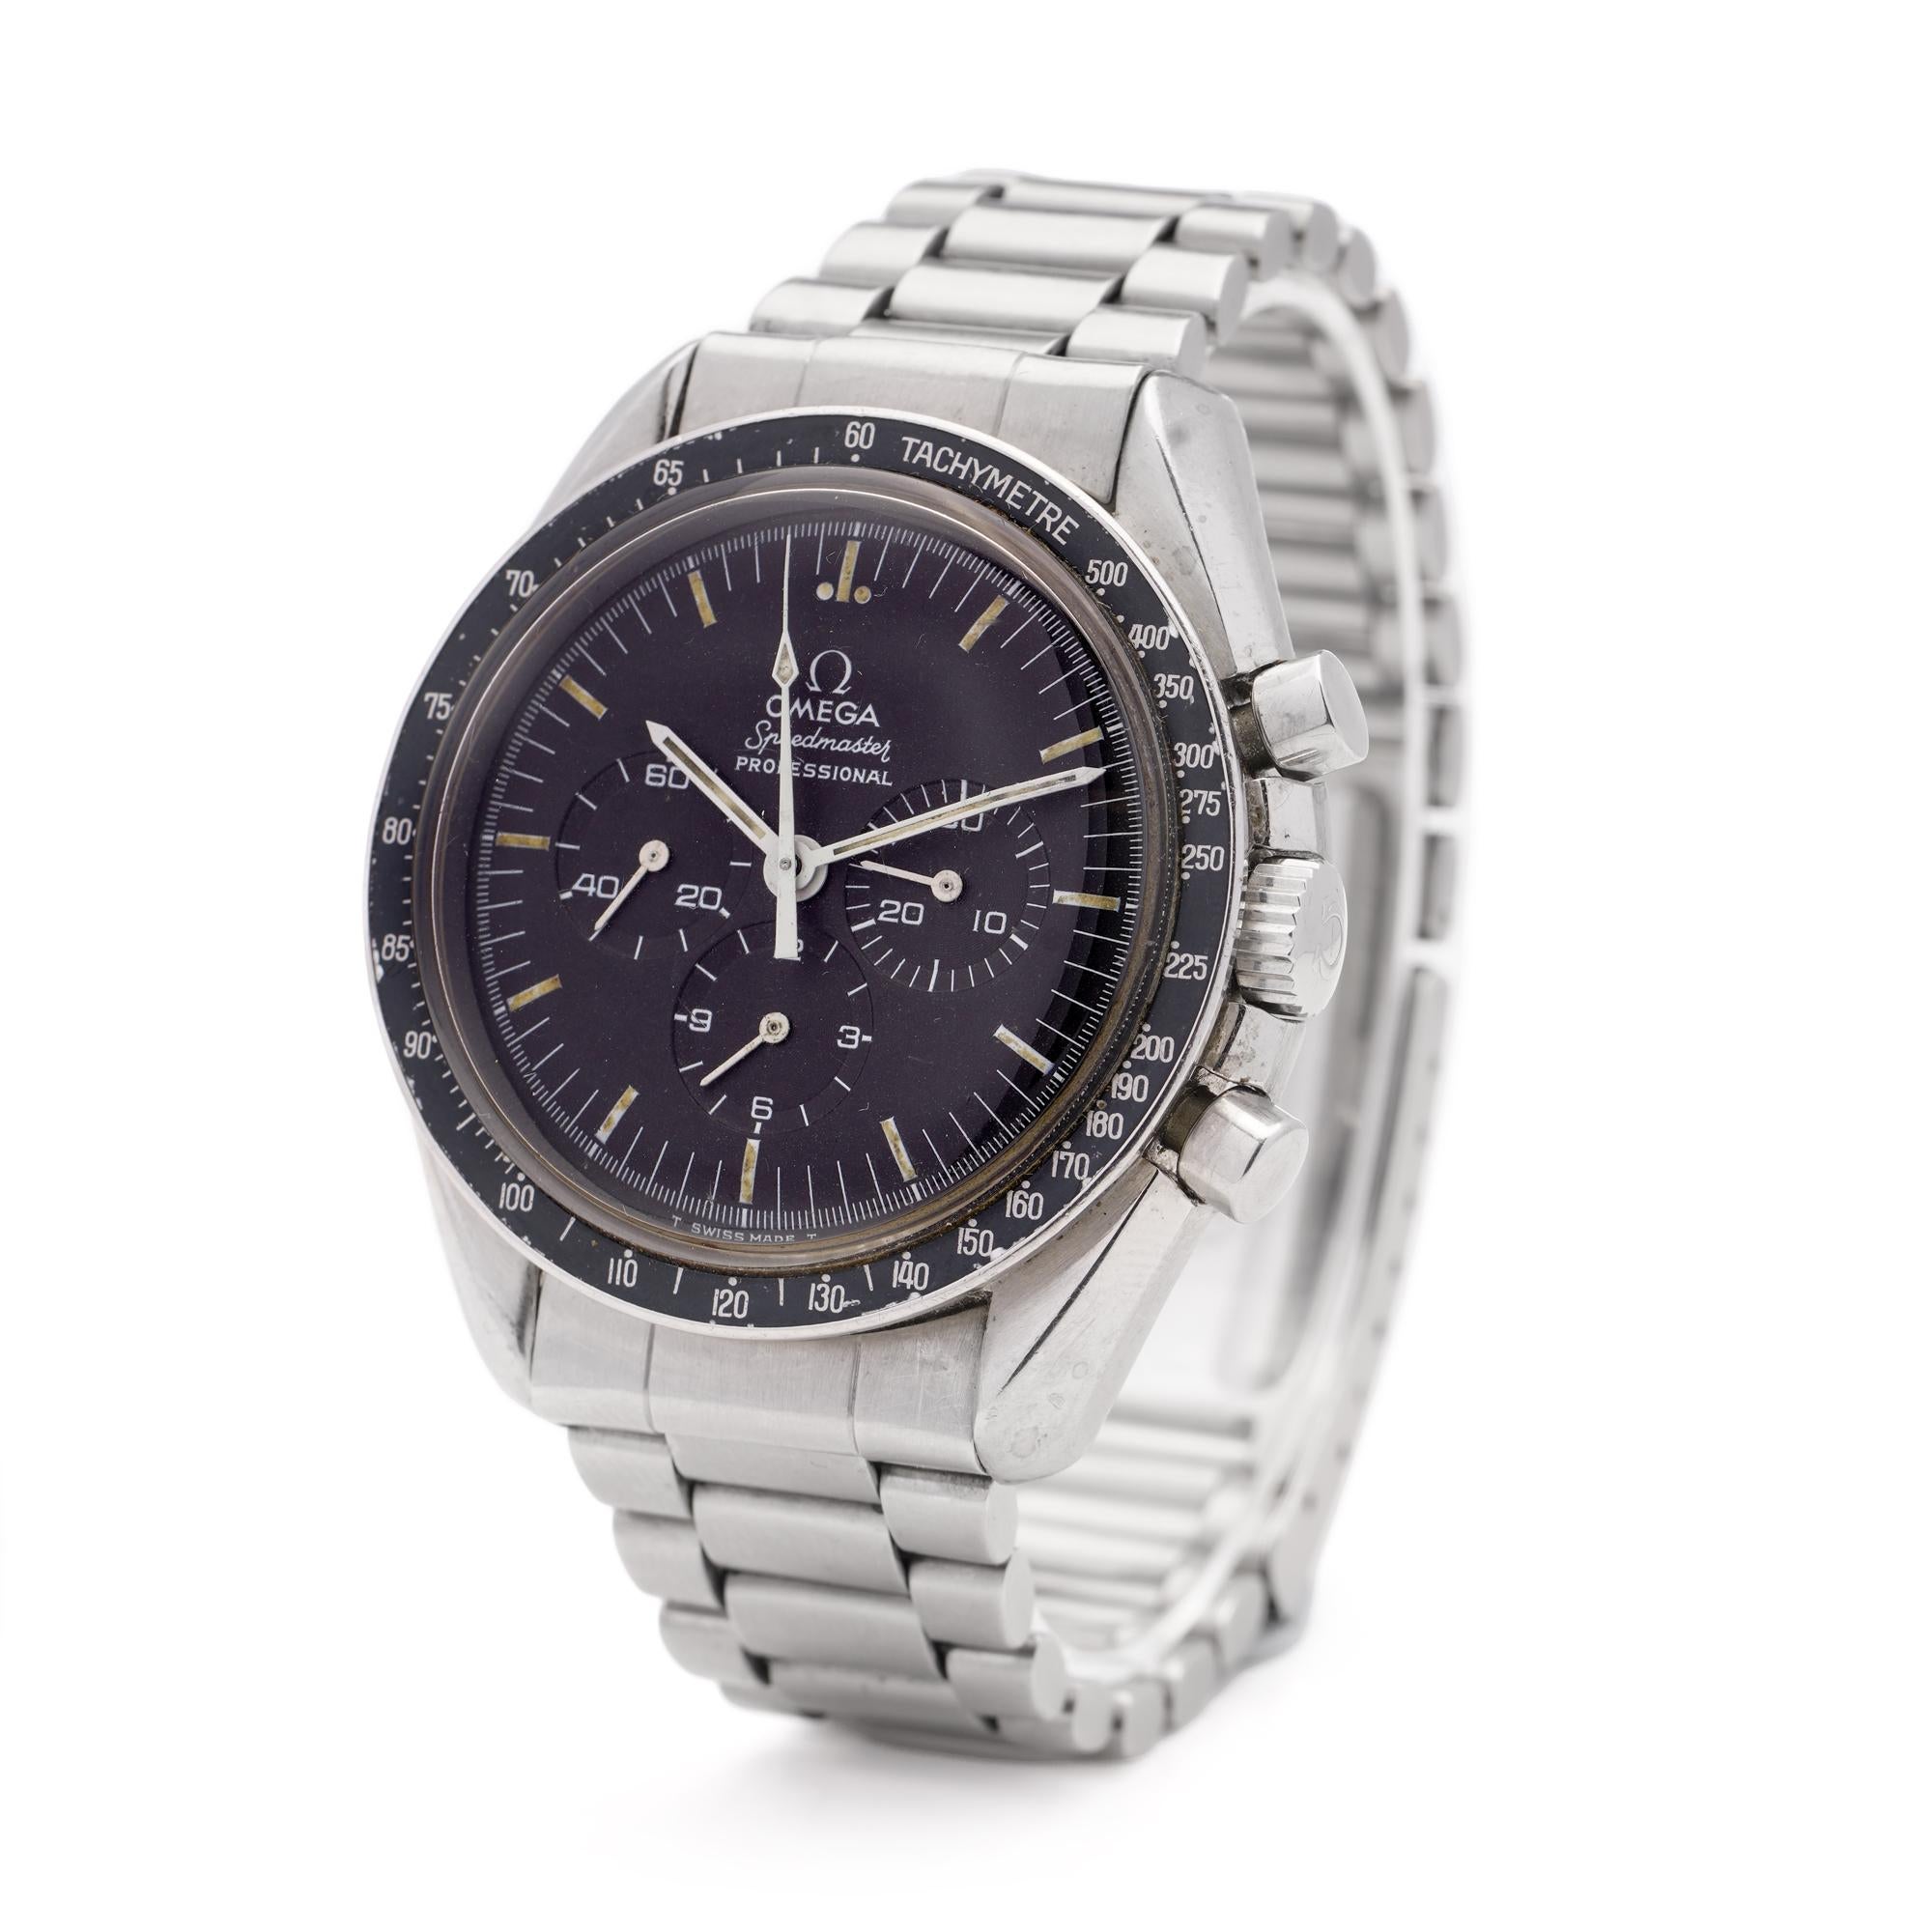 Omega Speedmaster Professional ‘Moonwatch’, 1974 For Sale 4